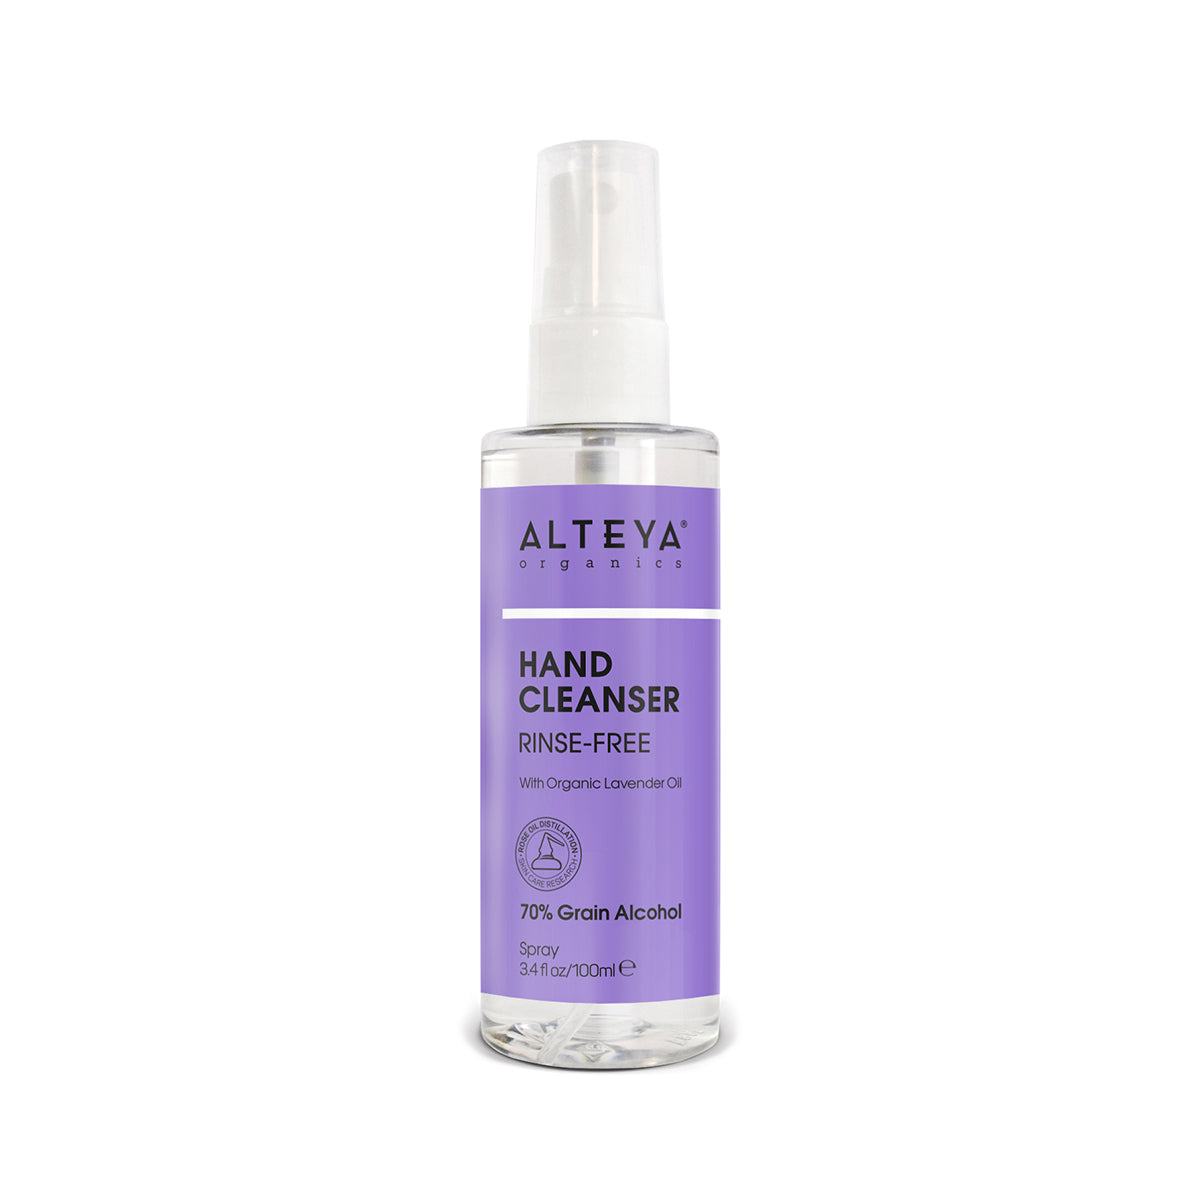 Rinse-Free with Organic Lavender Oil 100 ml